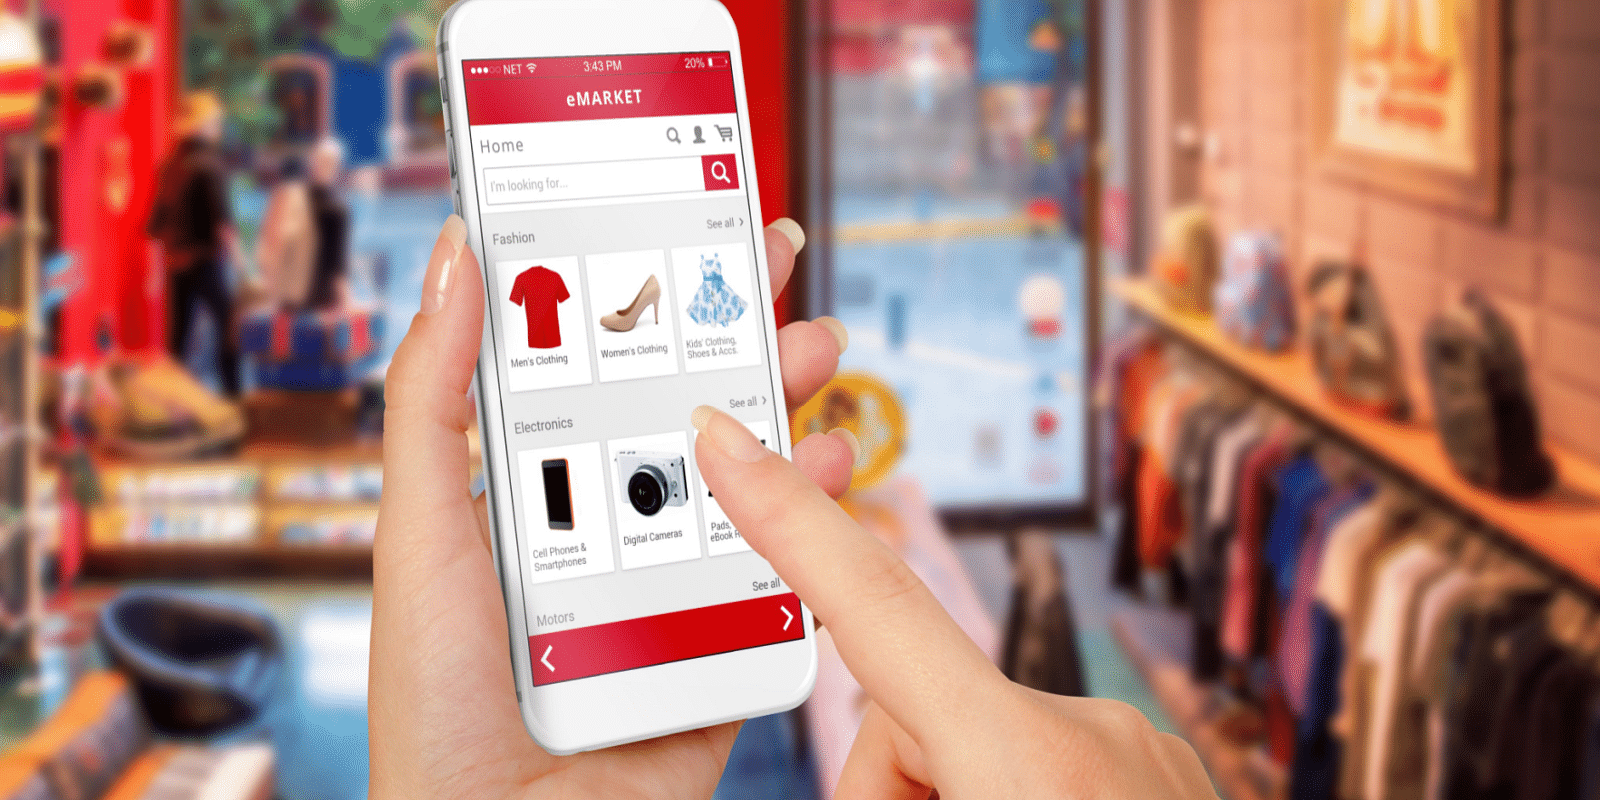 You are currently viewing Ecommerce enabler Graas raises $40M funding; acquires Shoptimize, SALEinALL